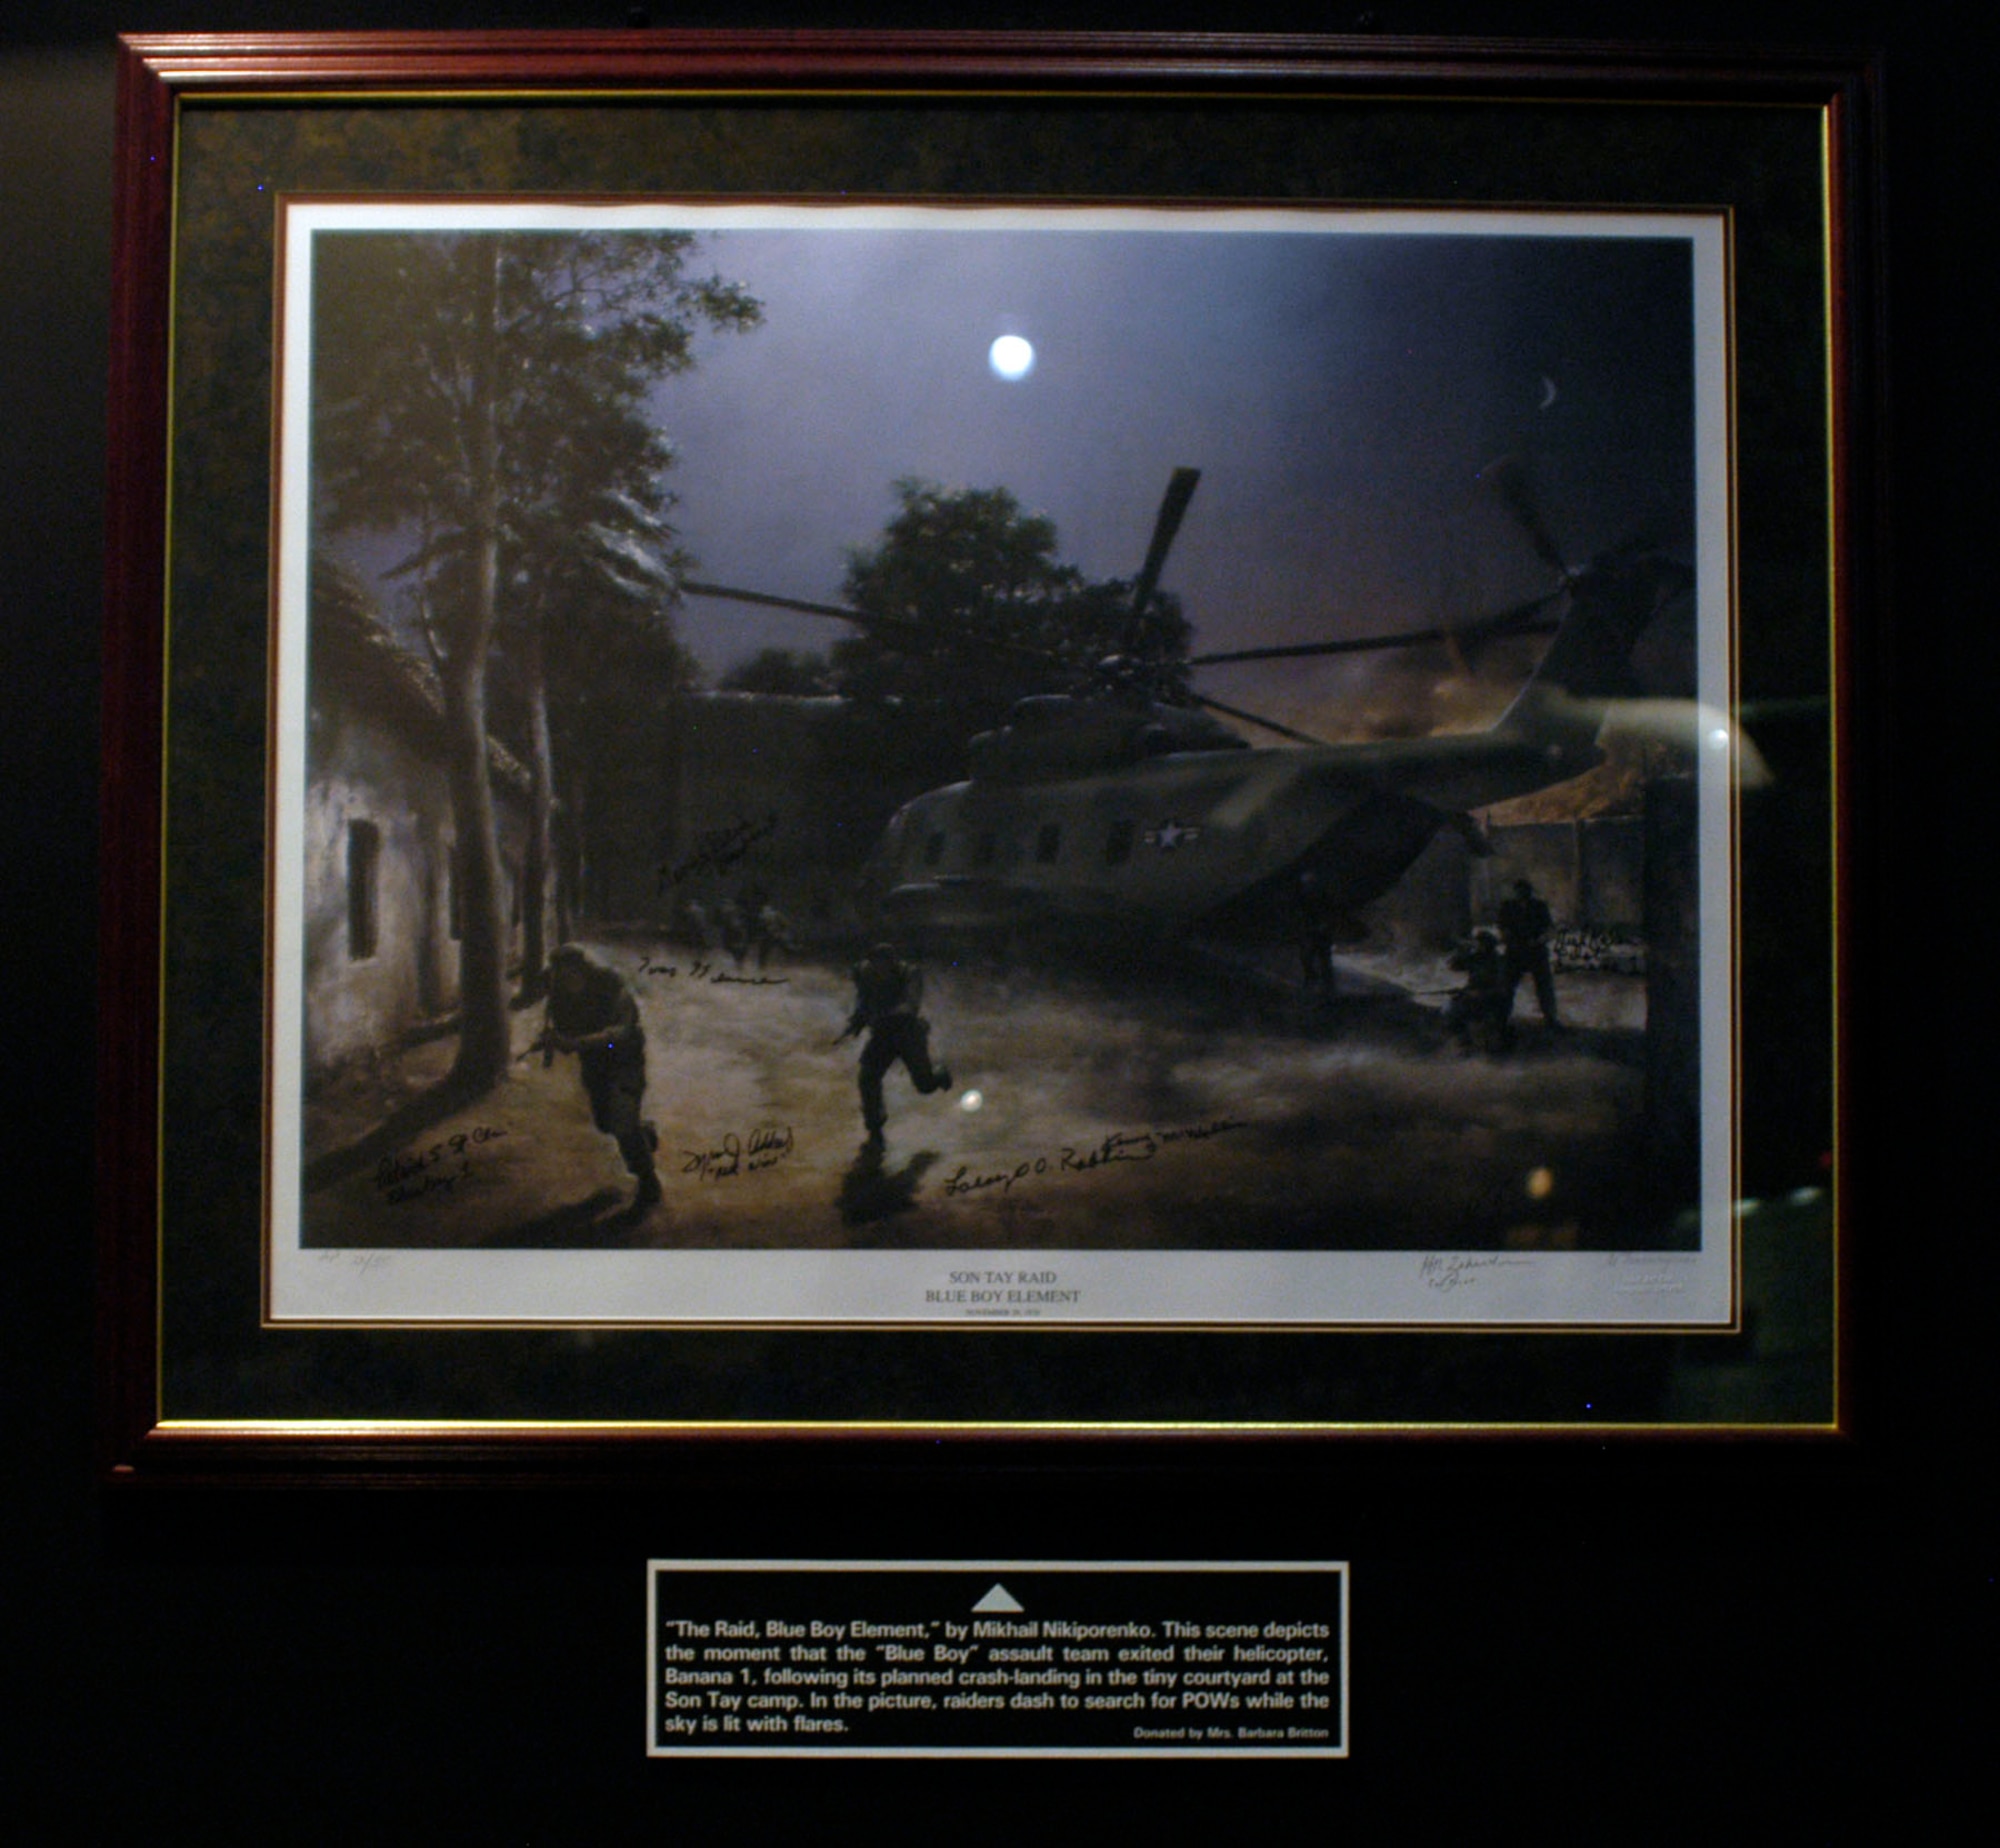 DAYTON, Ohio - “The Raid, Blue Boy Element,” by Mikhail Nikiporenko. This scene depicts the moment that the “Blue Boy” assault team exited their helicopter, Banana 1, following its planned crash-landing in the tiny courtyard at the Son Tay camp. In the picture, raiders dash to search for POWs while the sky is lit with flares.This framed lithograph is on display in the Return with Honor: American Prisoners of War in Southeast Asia exhibit in the Southeast Asia War Gallery at the National Museum of the U.S. Air Force. (U.S. Air Force photo)